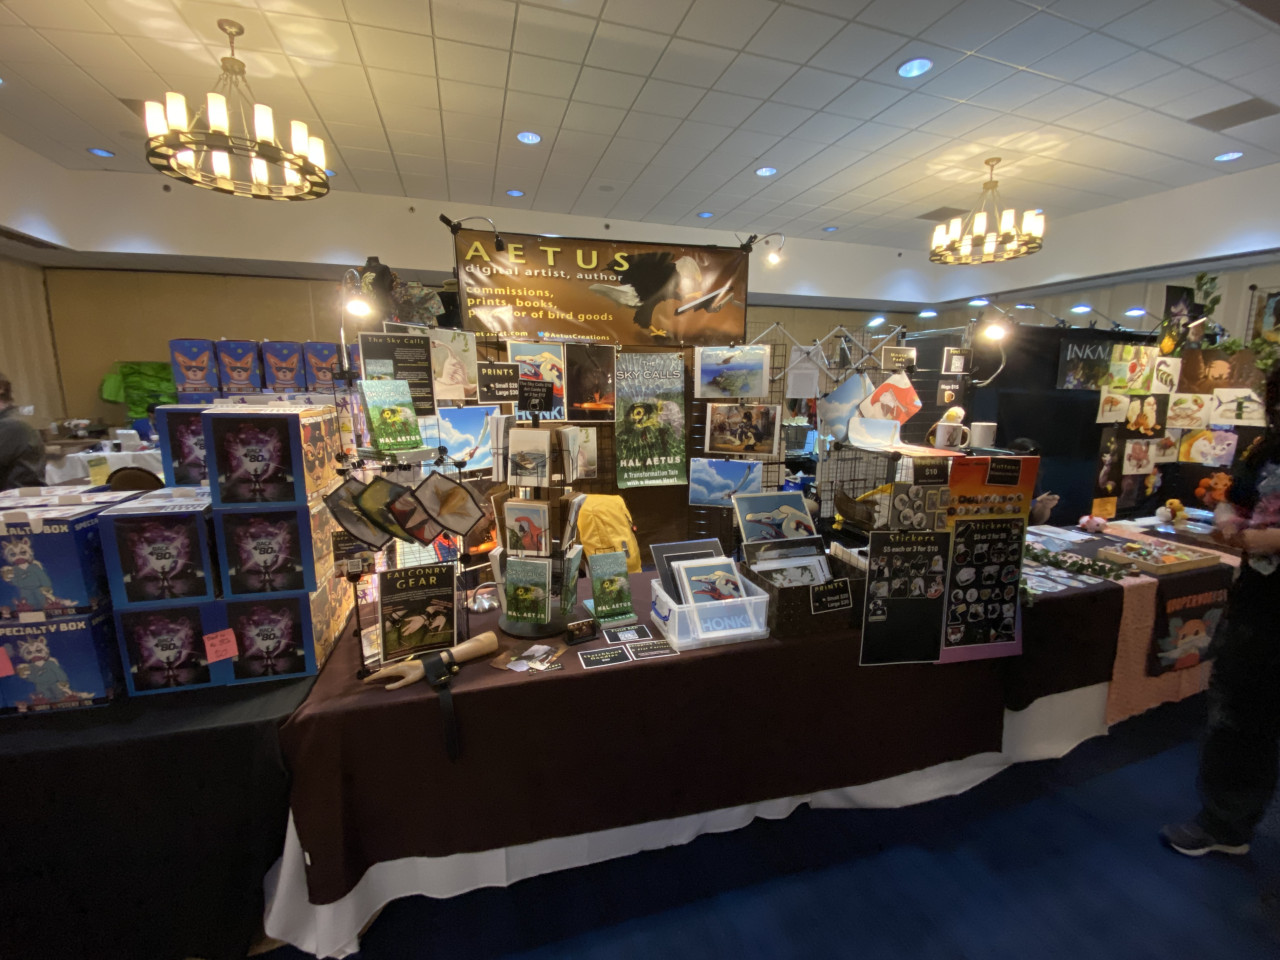 Convention display showing prints, masks, buttons, stickers, and books for sale.